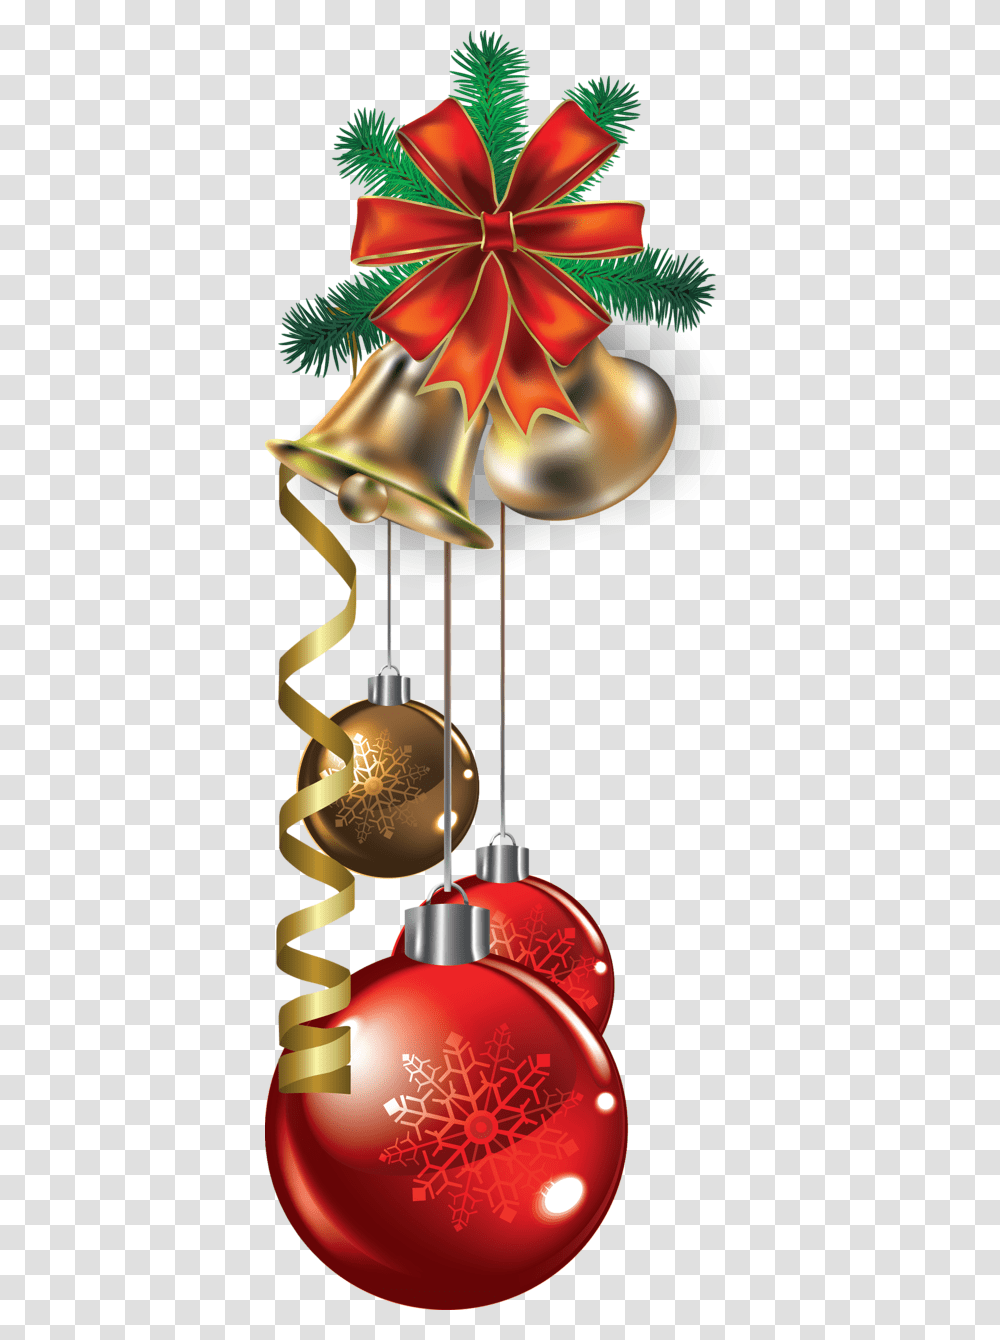 Natal Christmas Tree Decoration Hd, Lamp, Musical Instrument, Brass Section Transparent Png